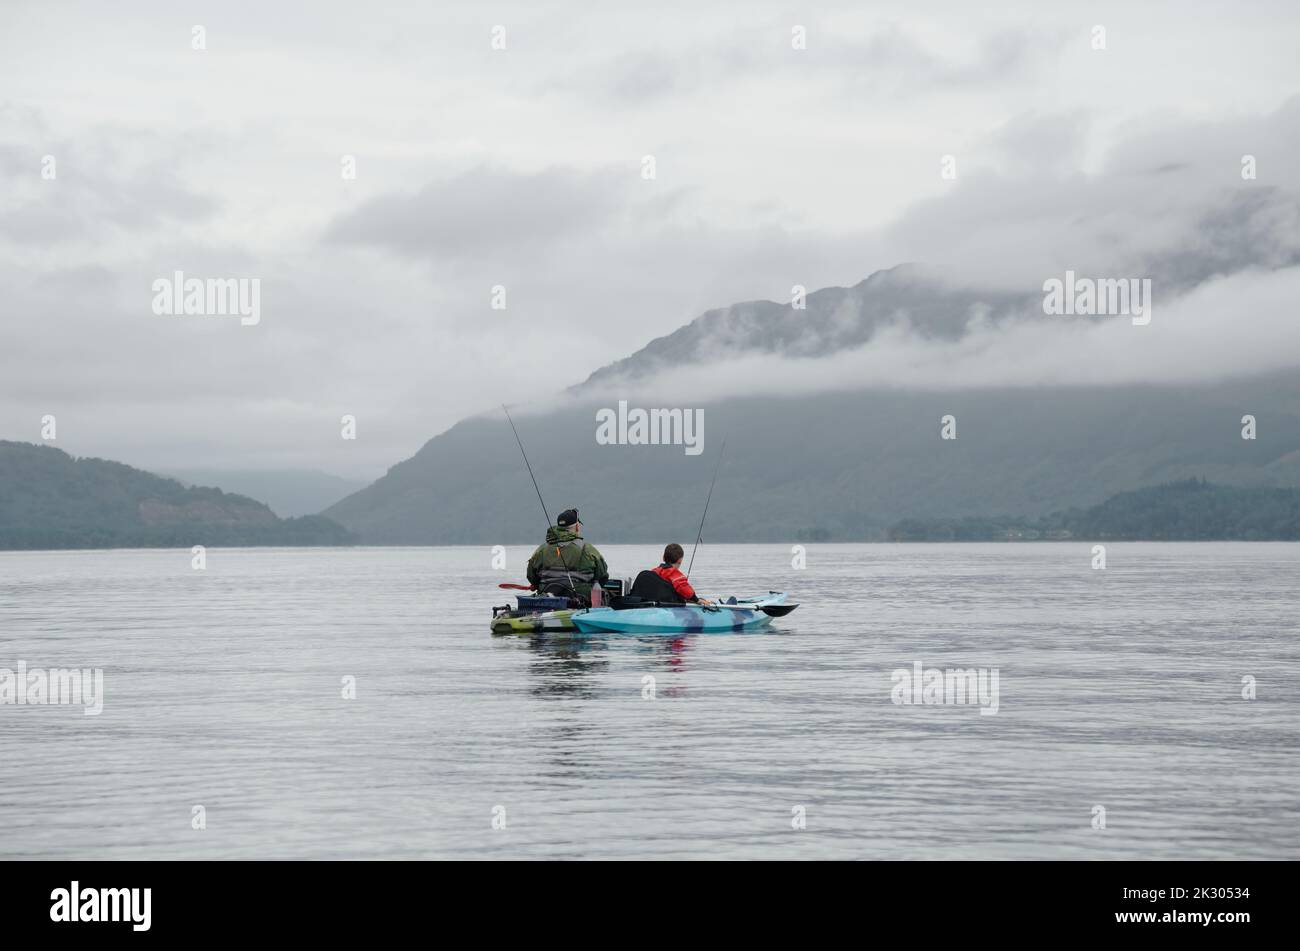 Fishing from kayak on calm water surrounded by mountain scenery Scotland Stock Photo